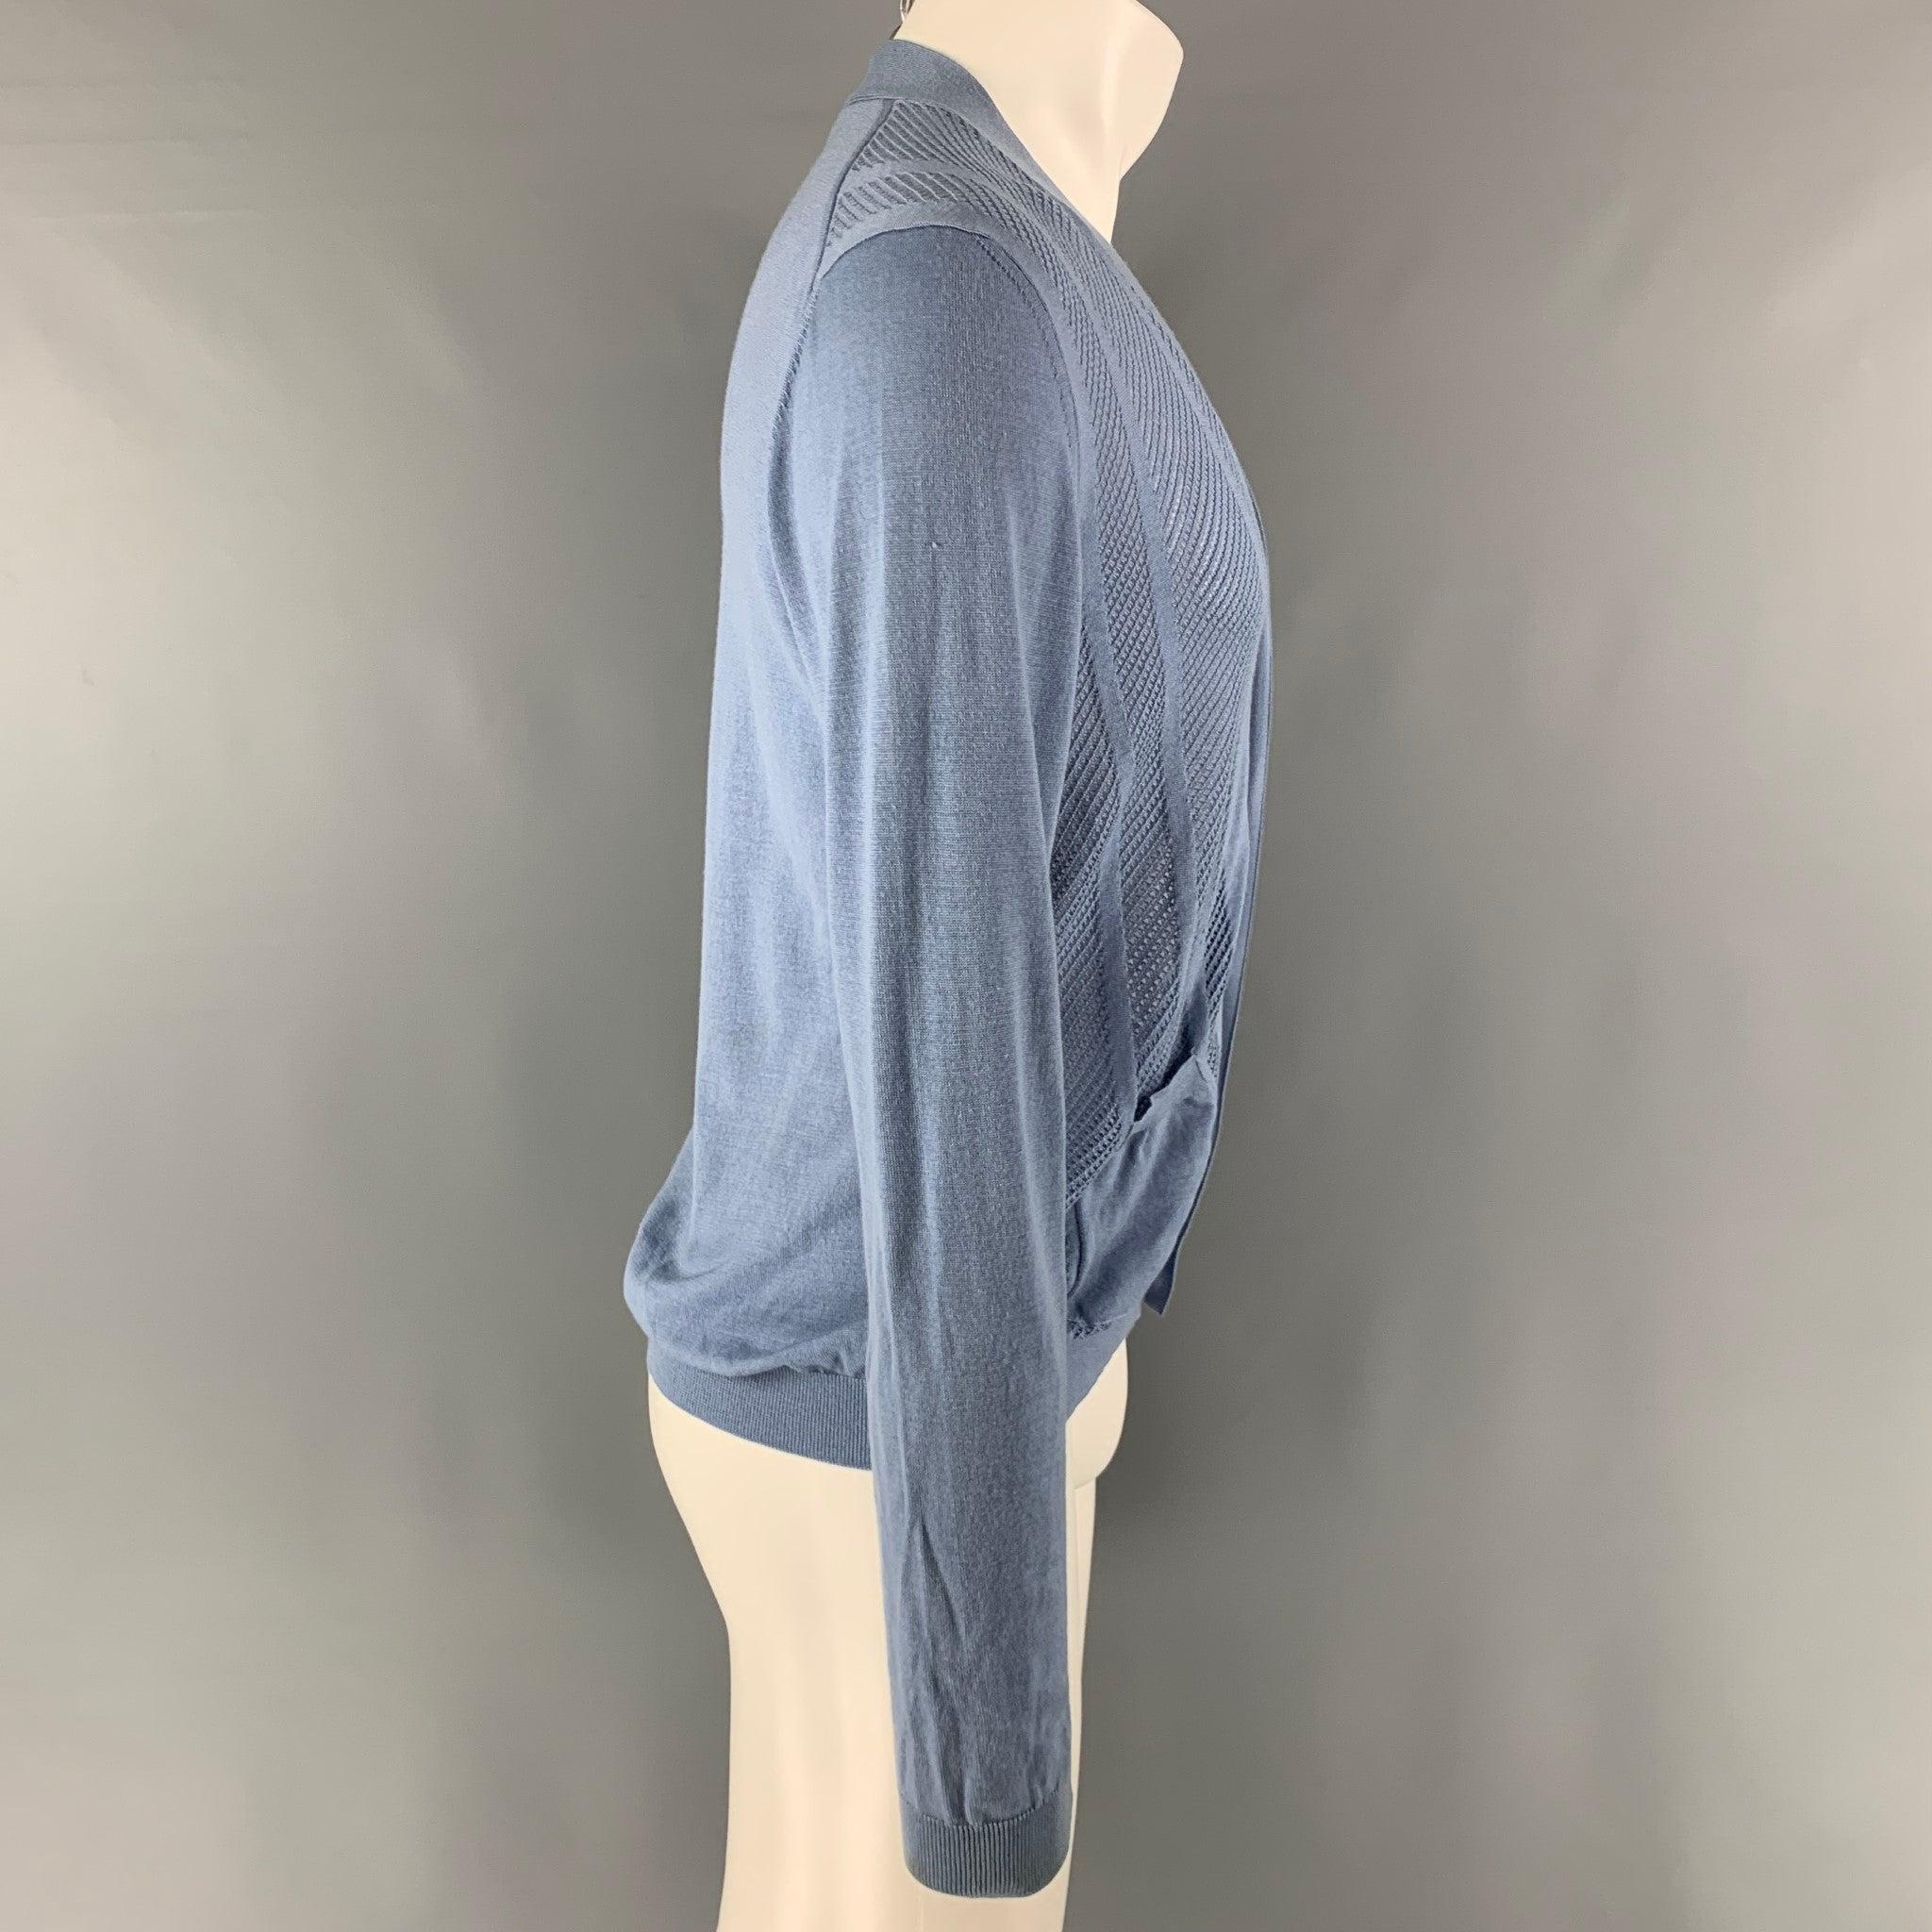 PRADA cardigan comes in a blue wool knit material featuring an open knit details at front, front pockets, and V-neck. Made in Italy.Good Pre-Owned Condition. Several marks, and moderate sign of wear. As -Is.  

Marked:   50 

Measurements: 
